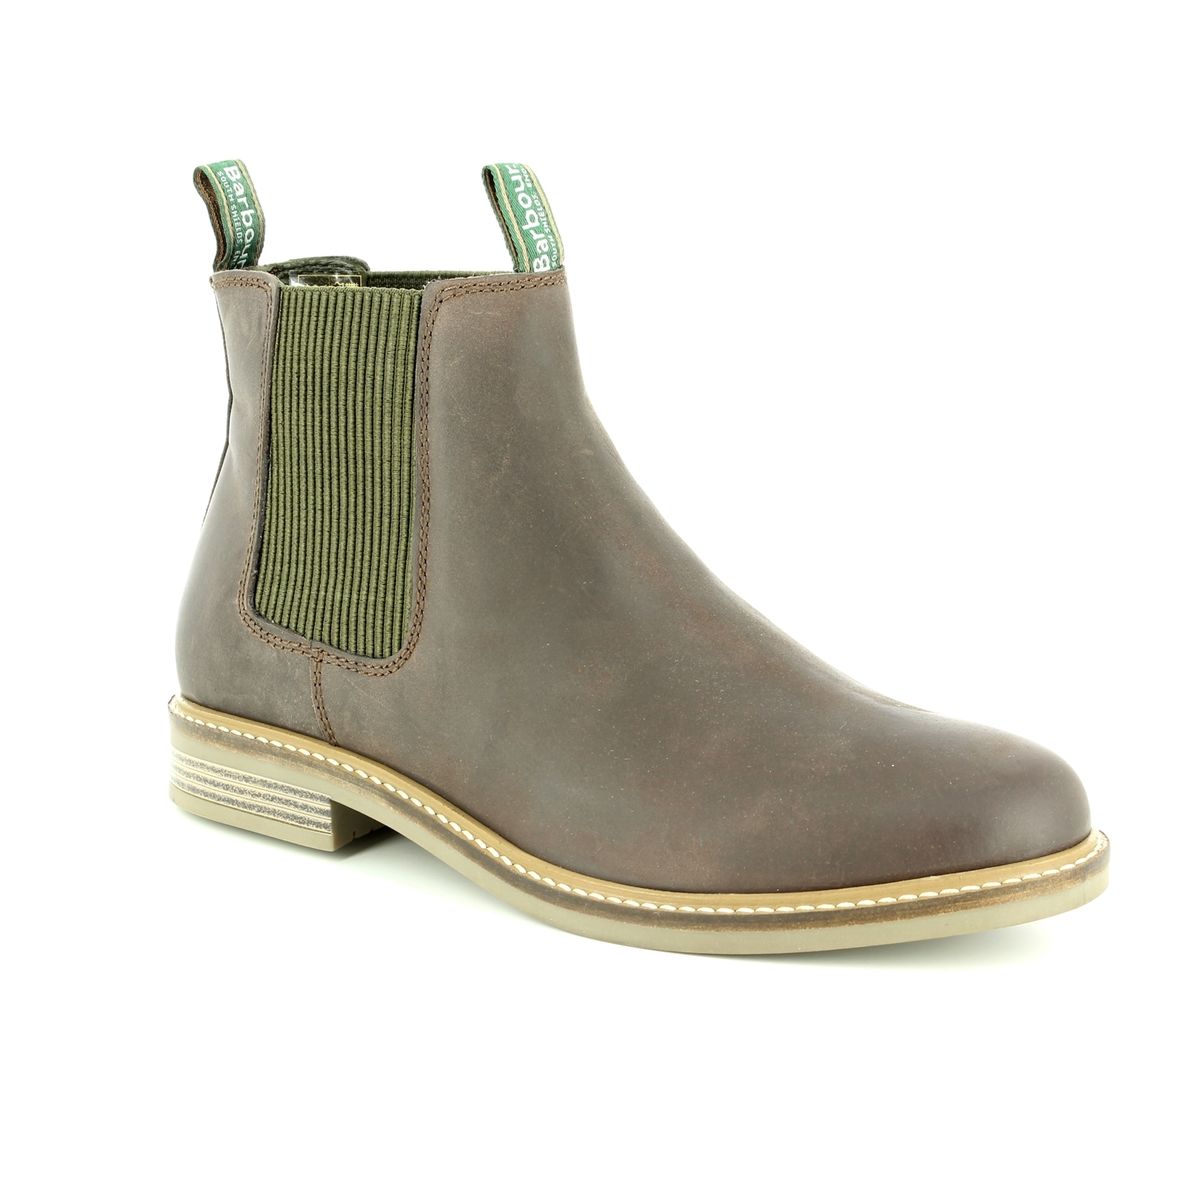 barbour farsley leather chelsea boots